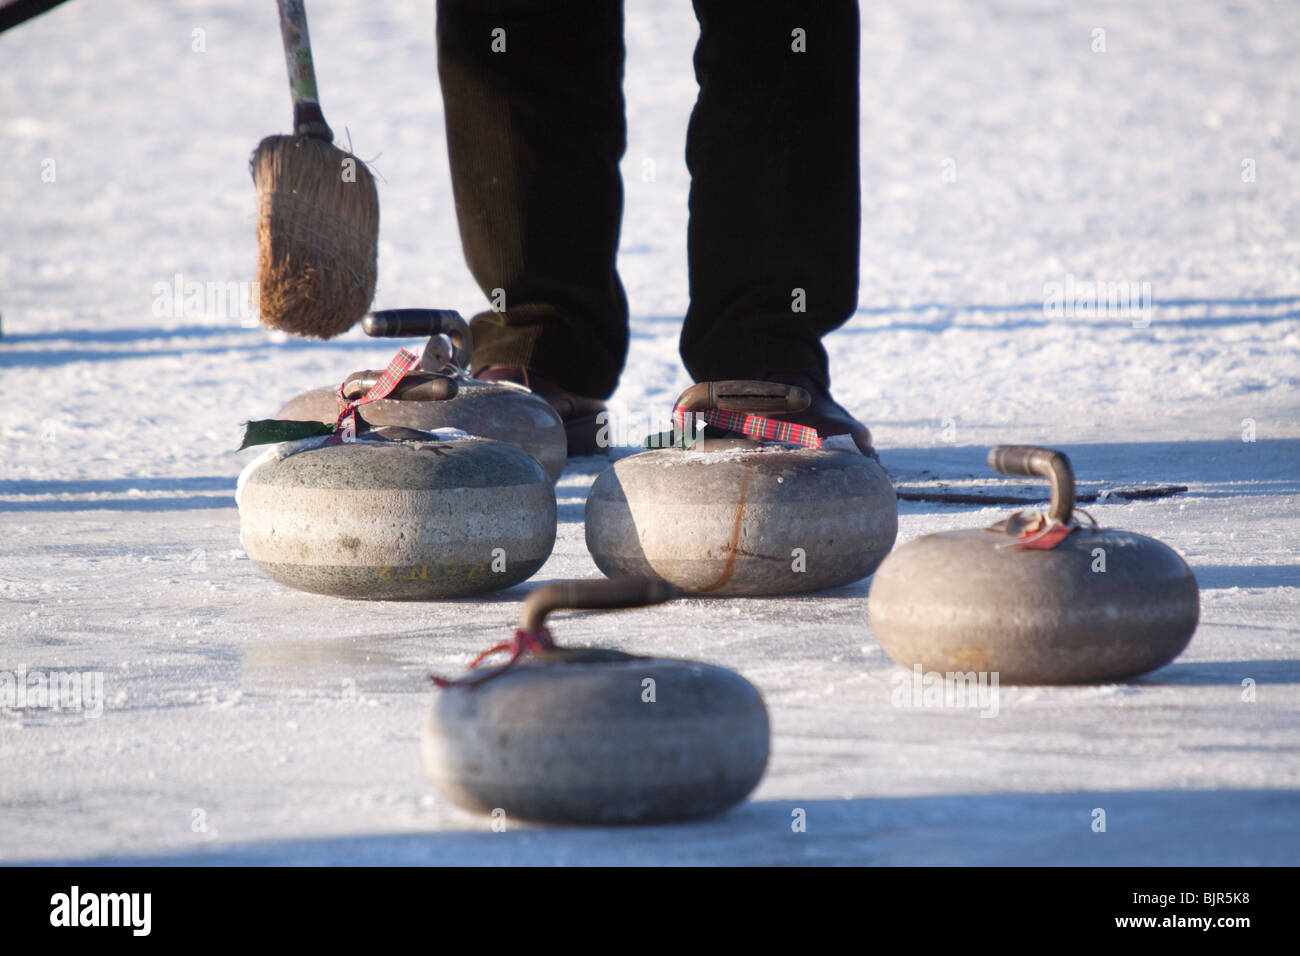 Curling on frozen Lake of Menteith Scotland Stock Photo